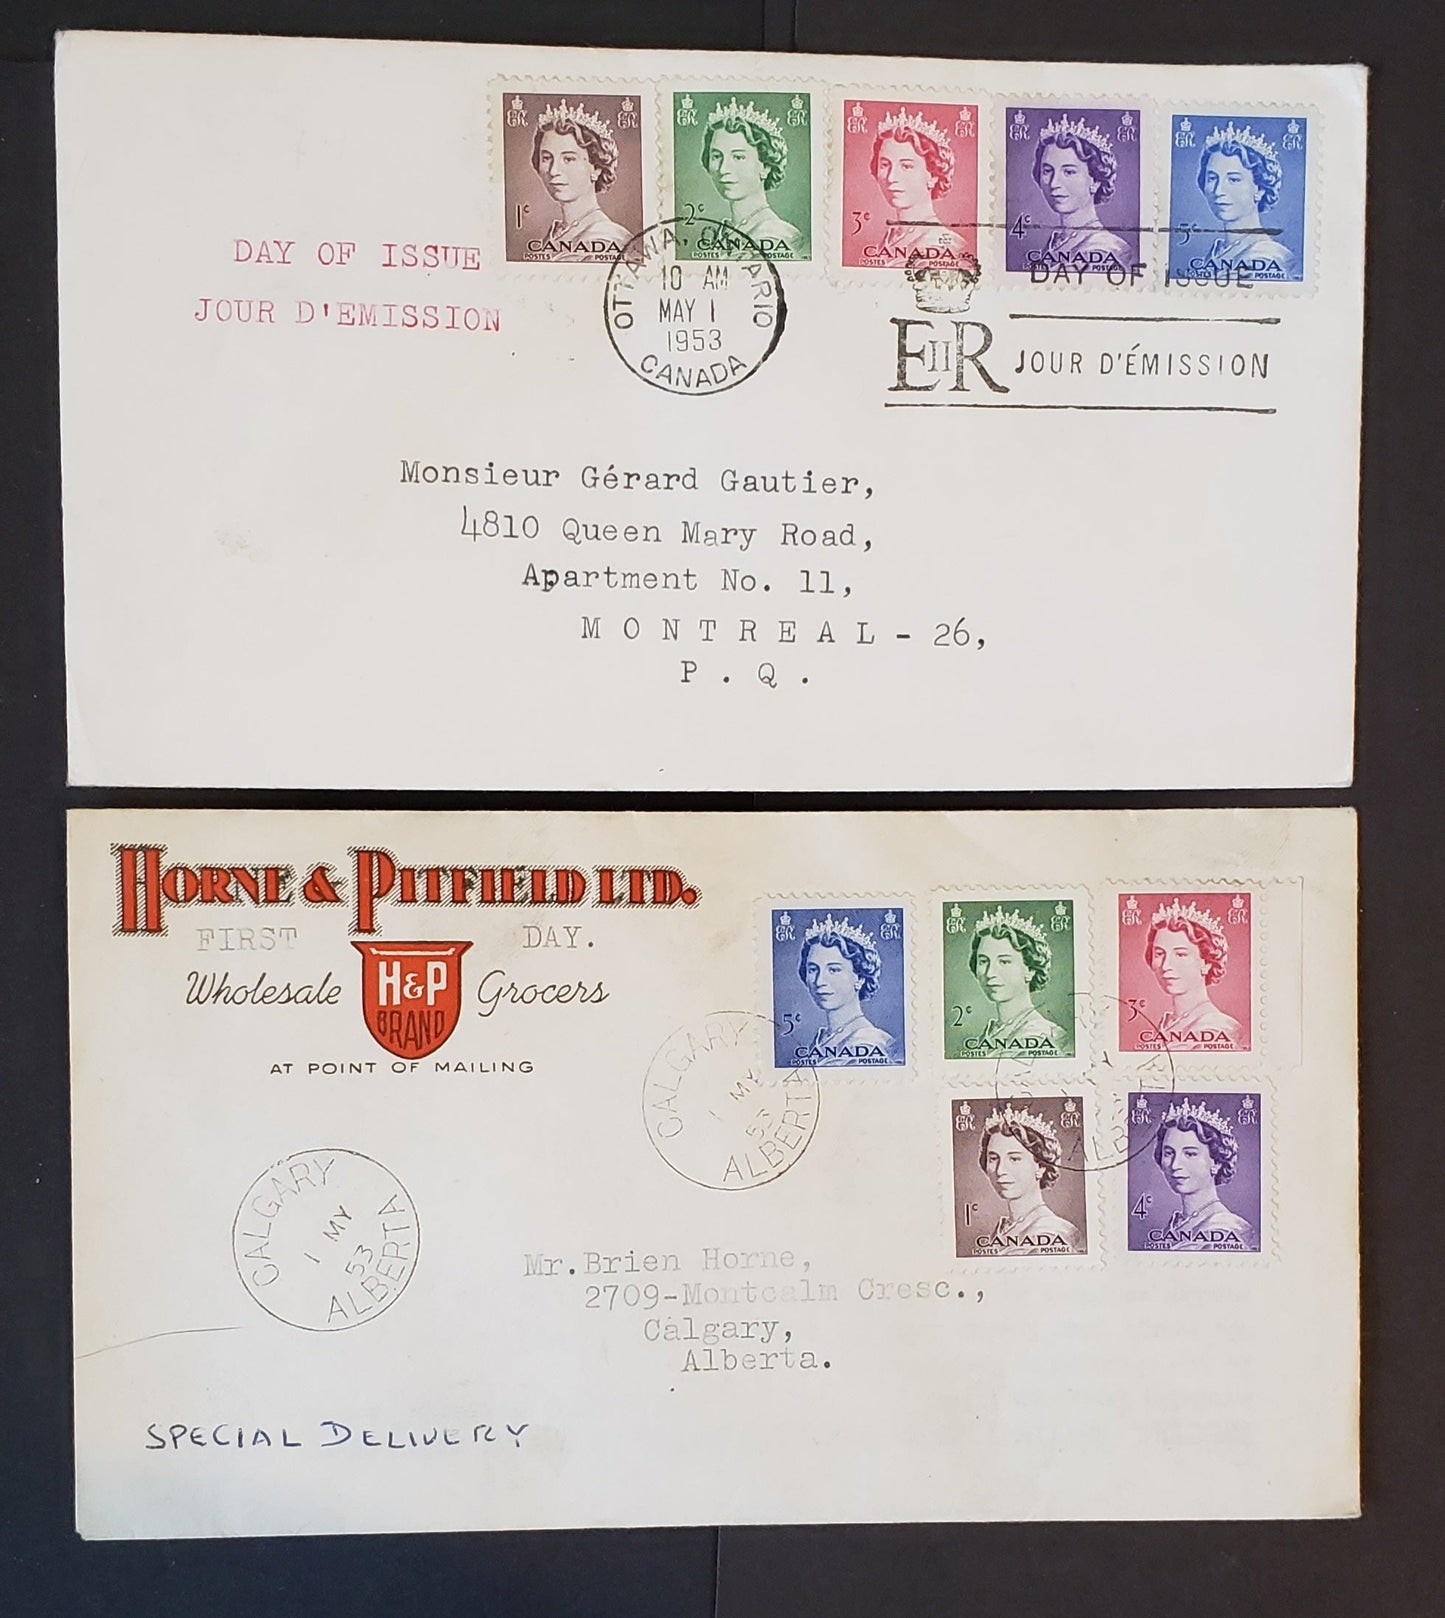 Lot 9 Canada #325-329 1c-5c Violet Brown-Ultramarine Queen Elizabeth II 1953 Karsh Issue, 2 No Cachets First Day Covers Franked With Combination Singles, All Addressed, Cat. Value $28